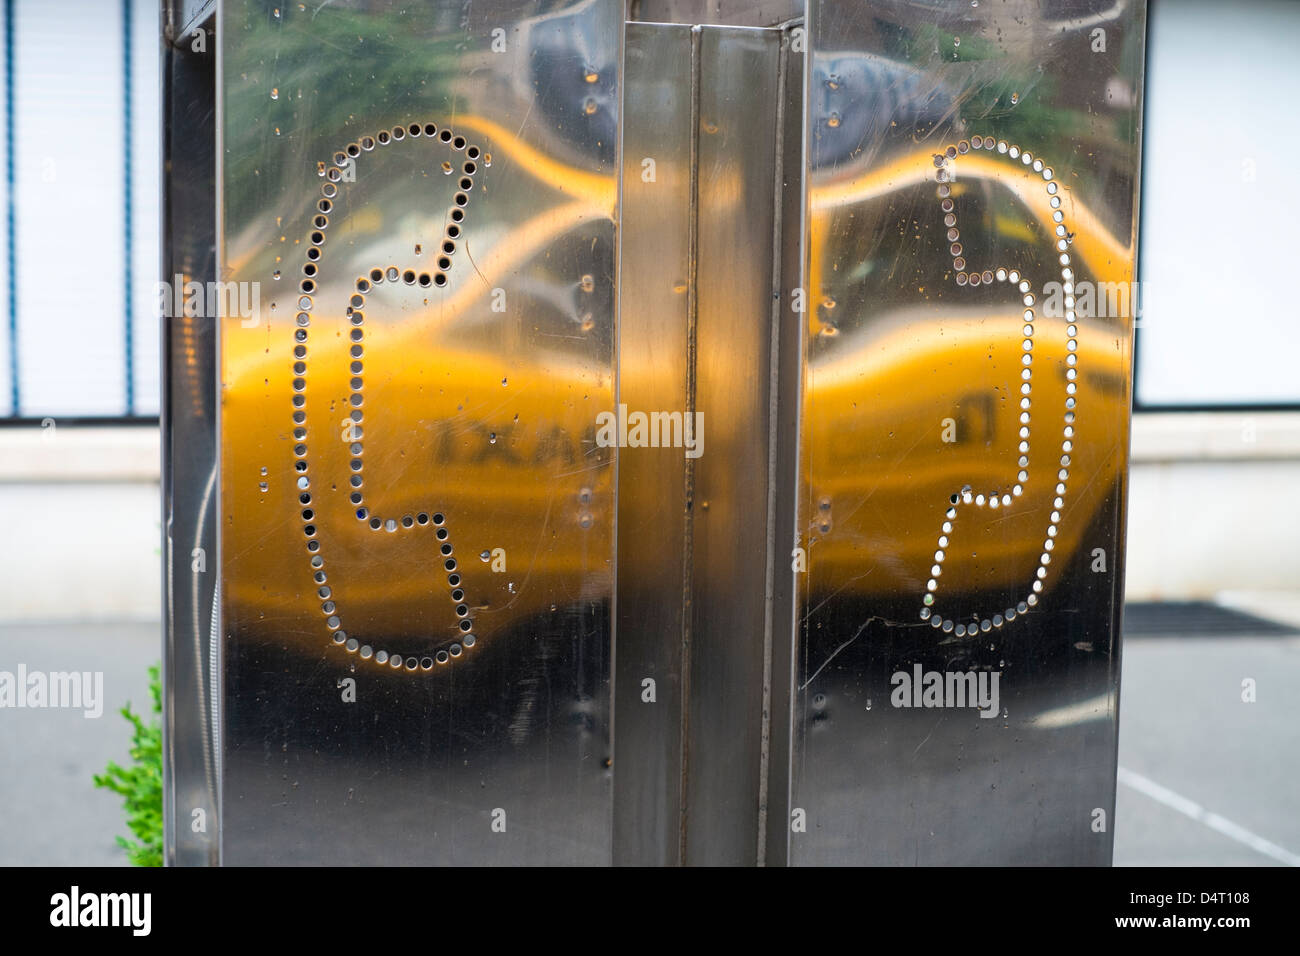 Yellow cab reflected on a street public phone Stock Photo